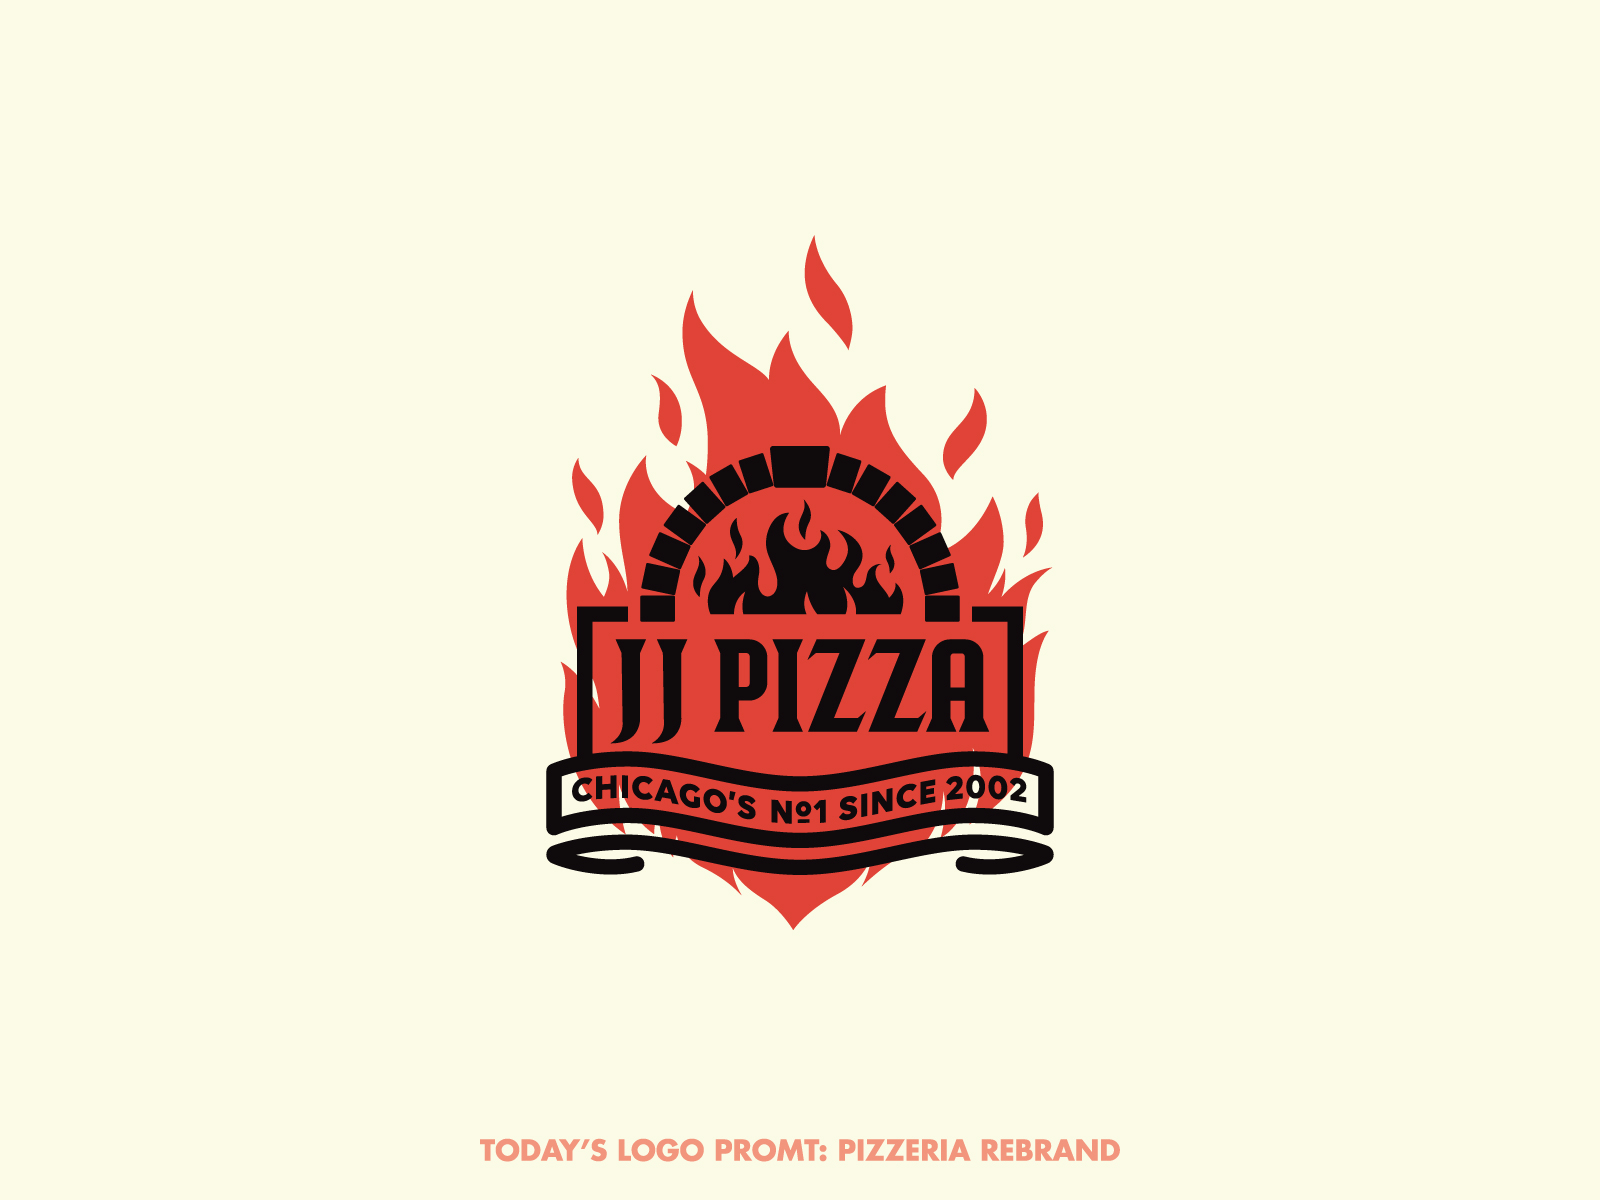 JJ Pizza rebrand (day 13 of 99) by Mille Joules on Dribbble